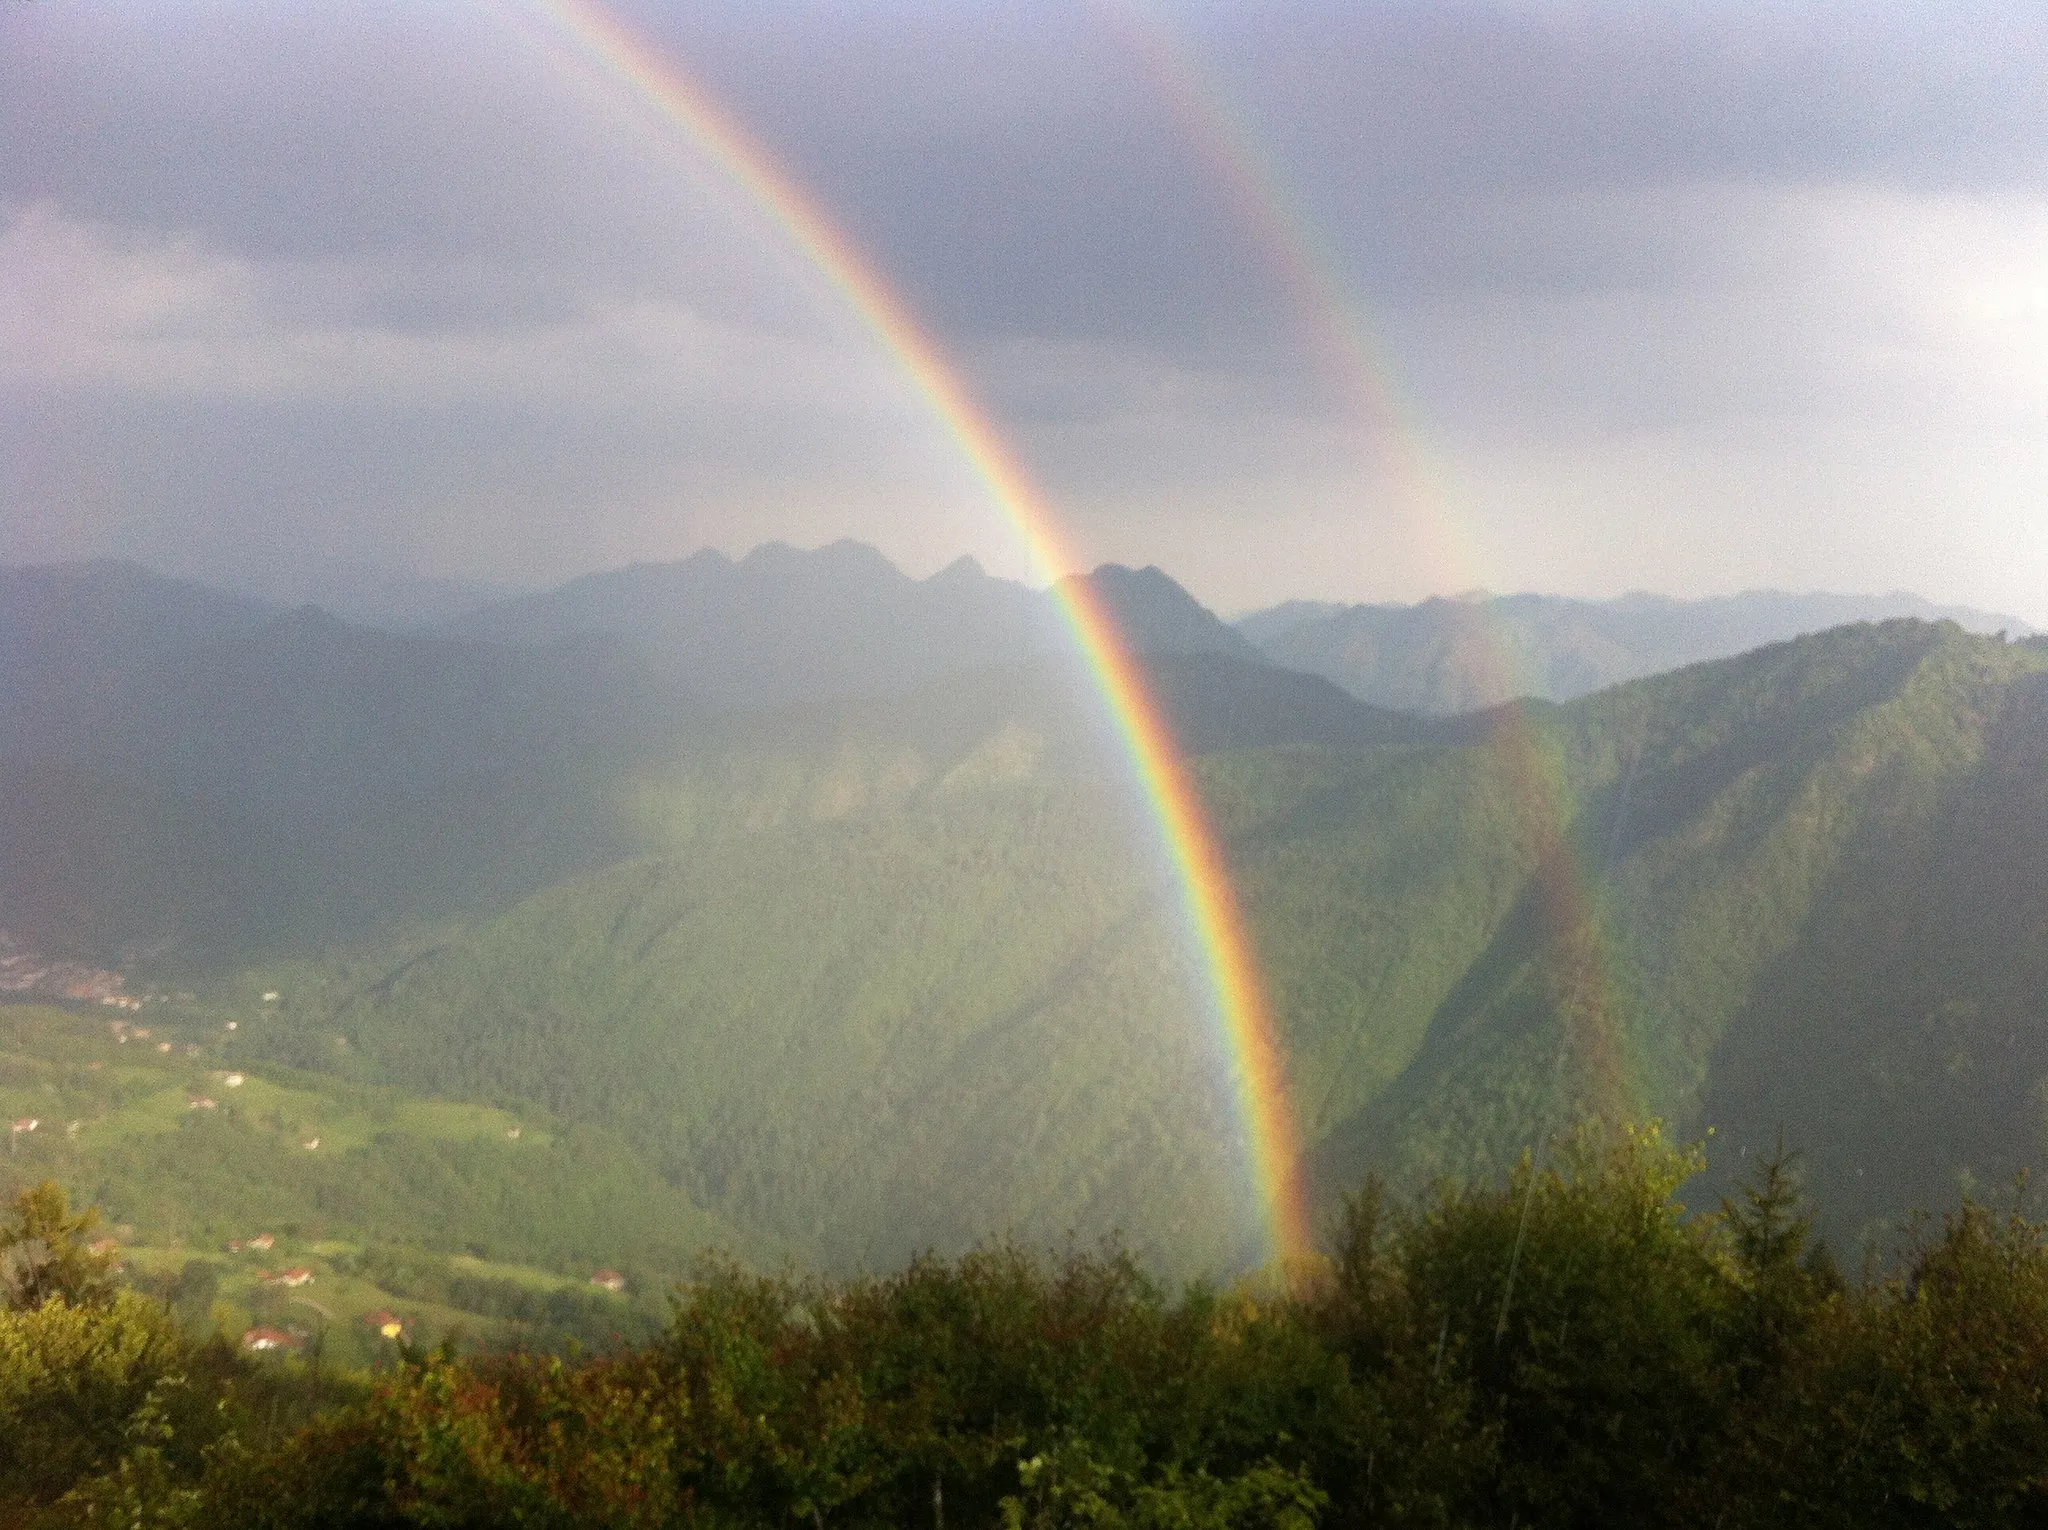 Photo showing: Val trompia

Arcobaleno in val Trompia